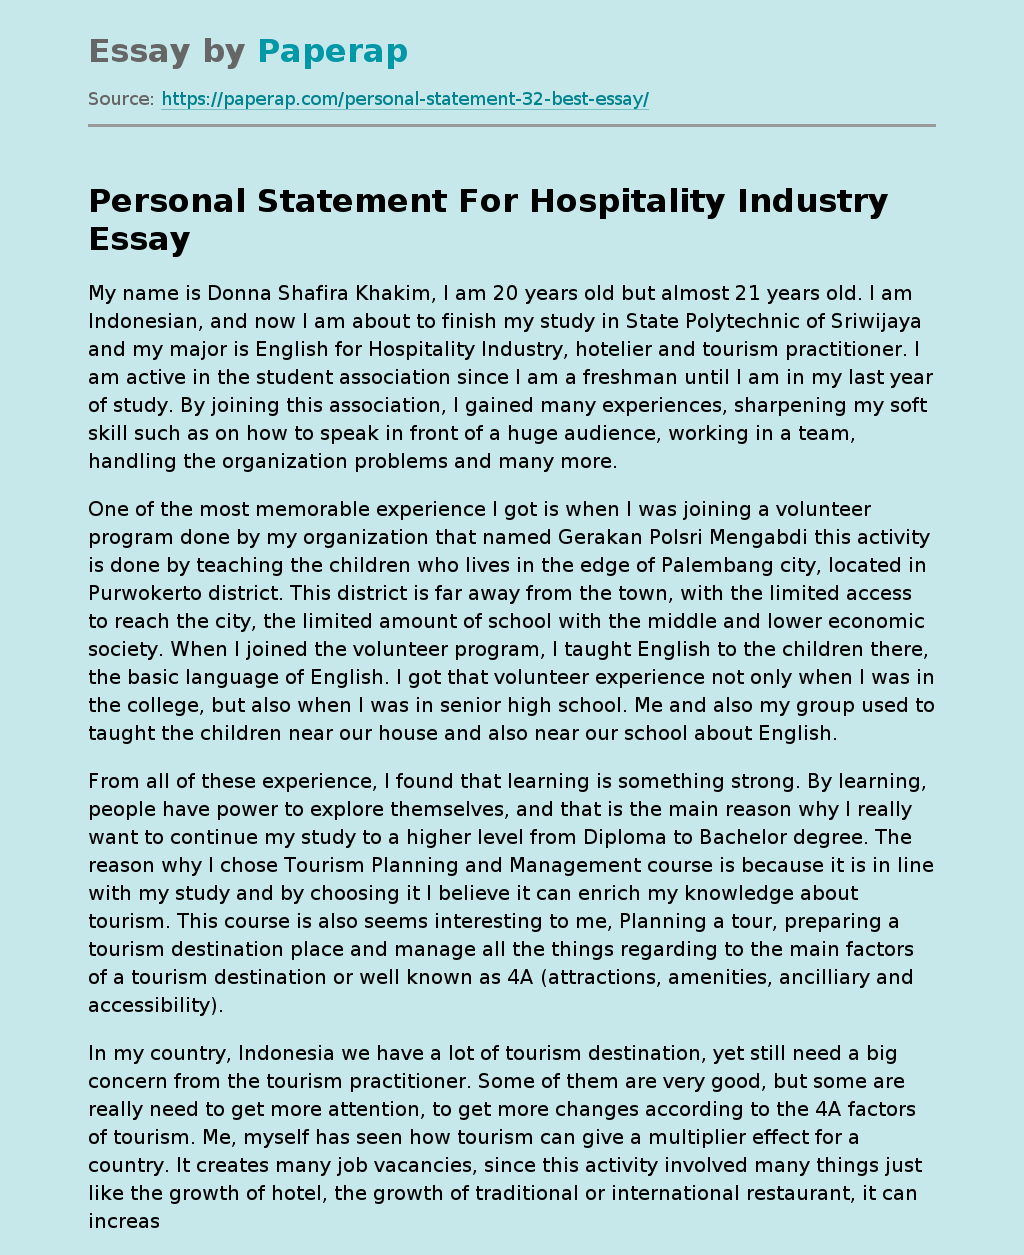 Personal Statement For Hospitality Industry